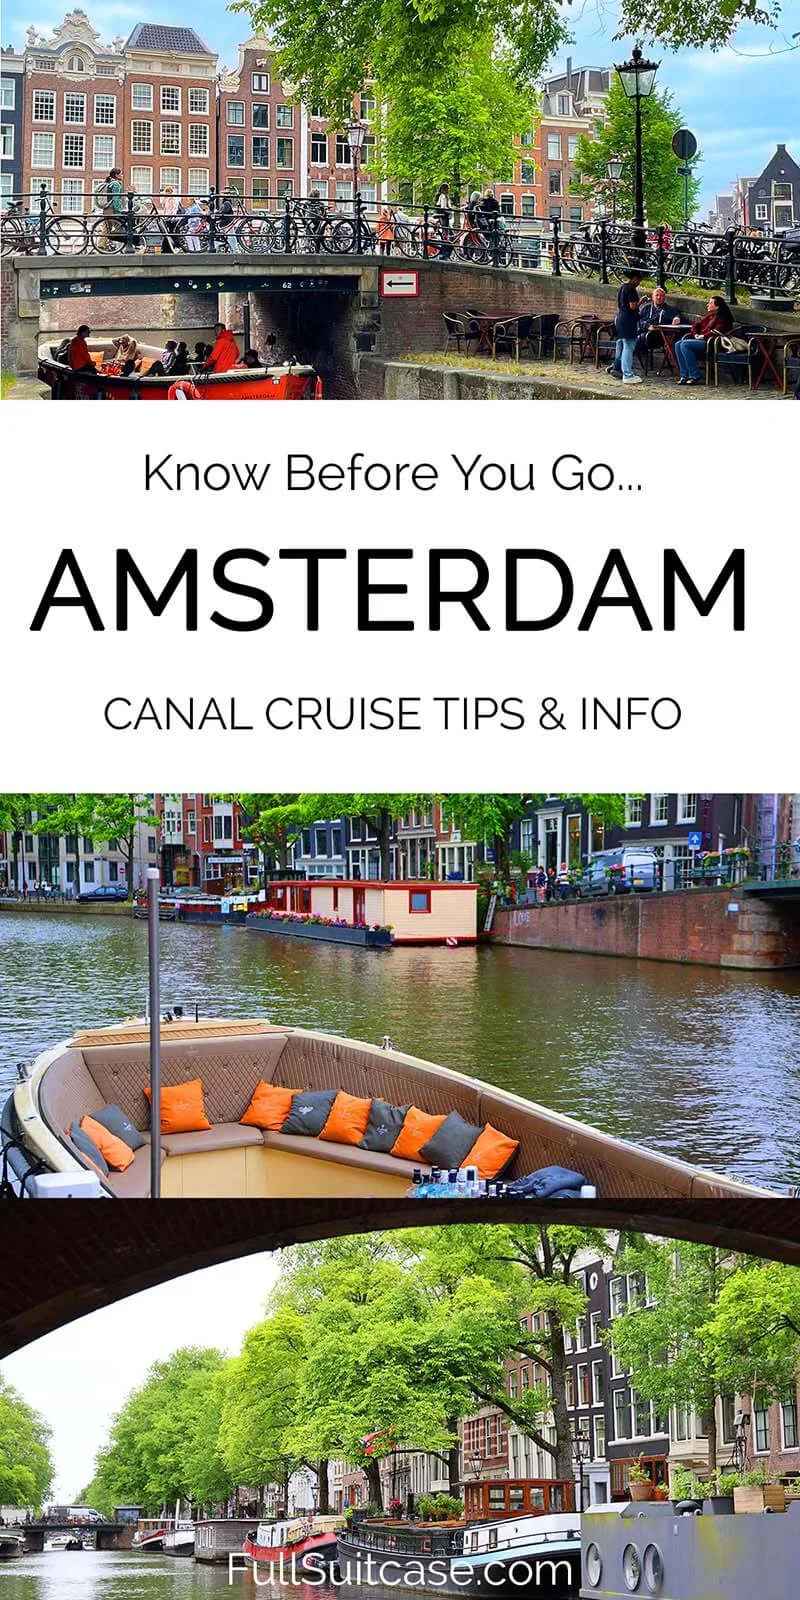 Tips and info for Amsterdam canals cruise and boat tours